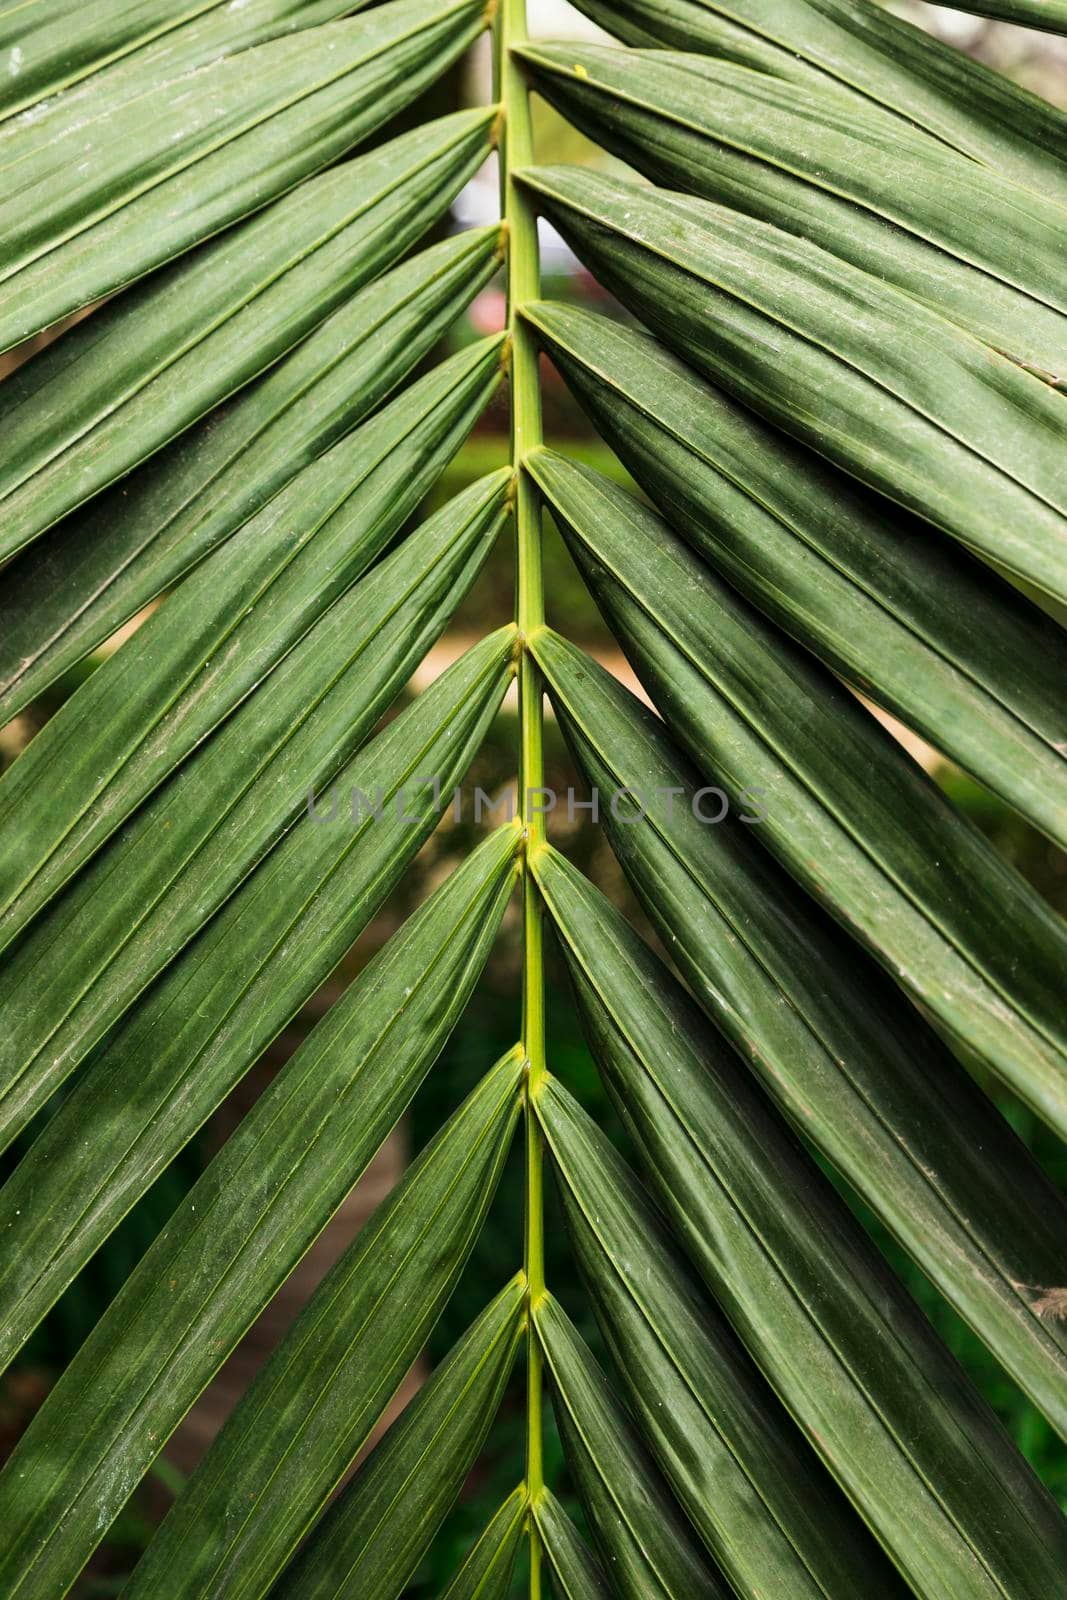 green exotic leaves close up. High quality photo by Zahard